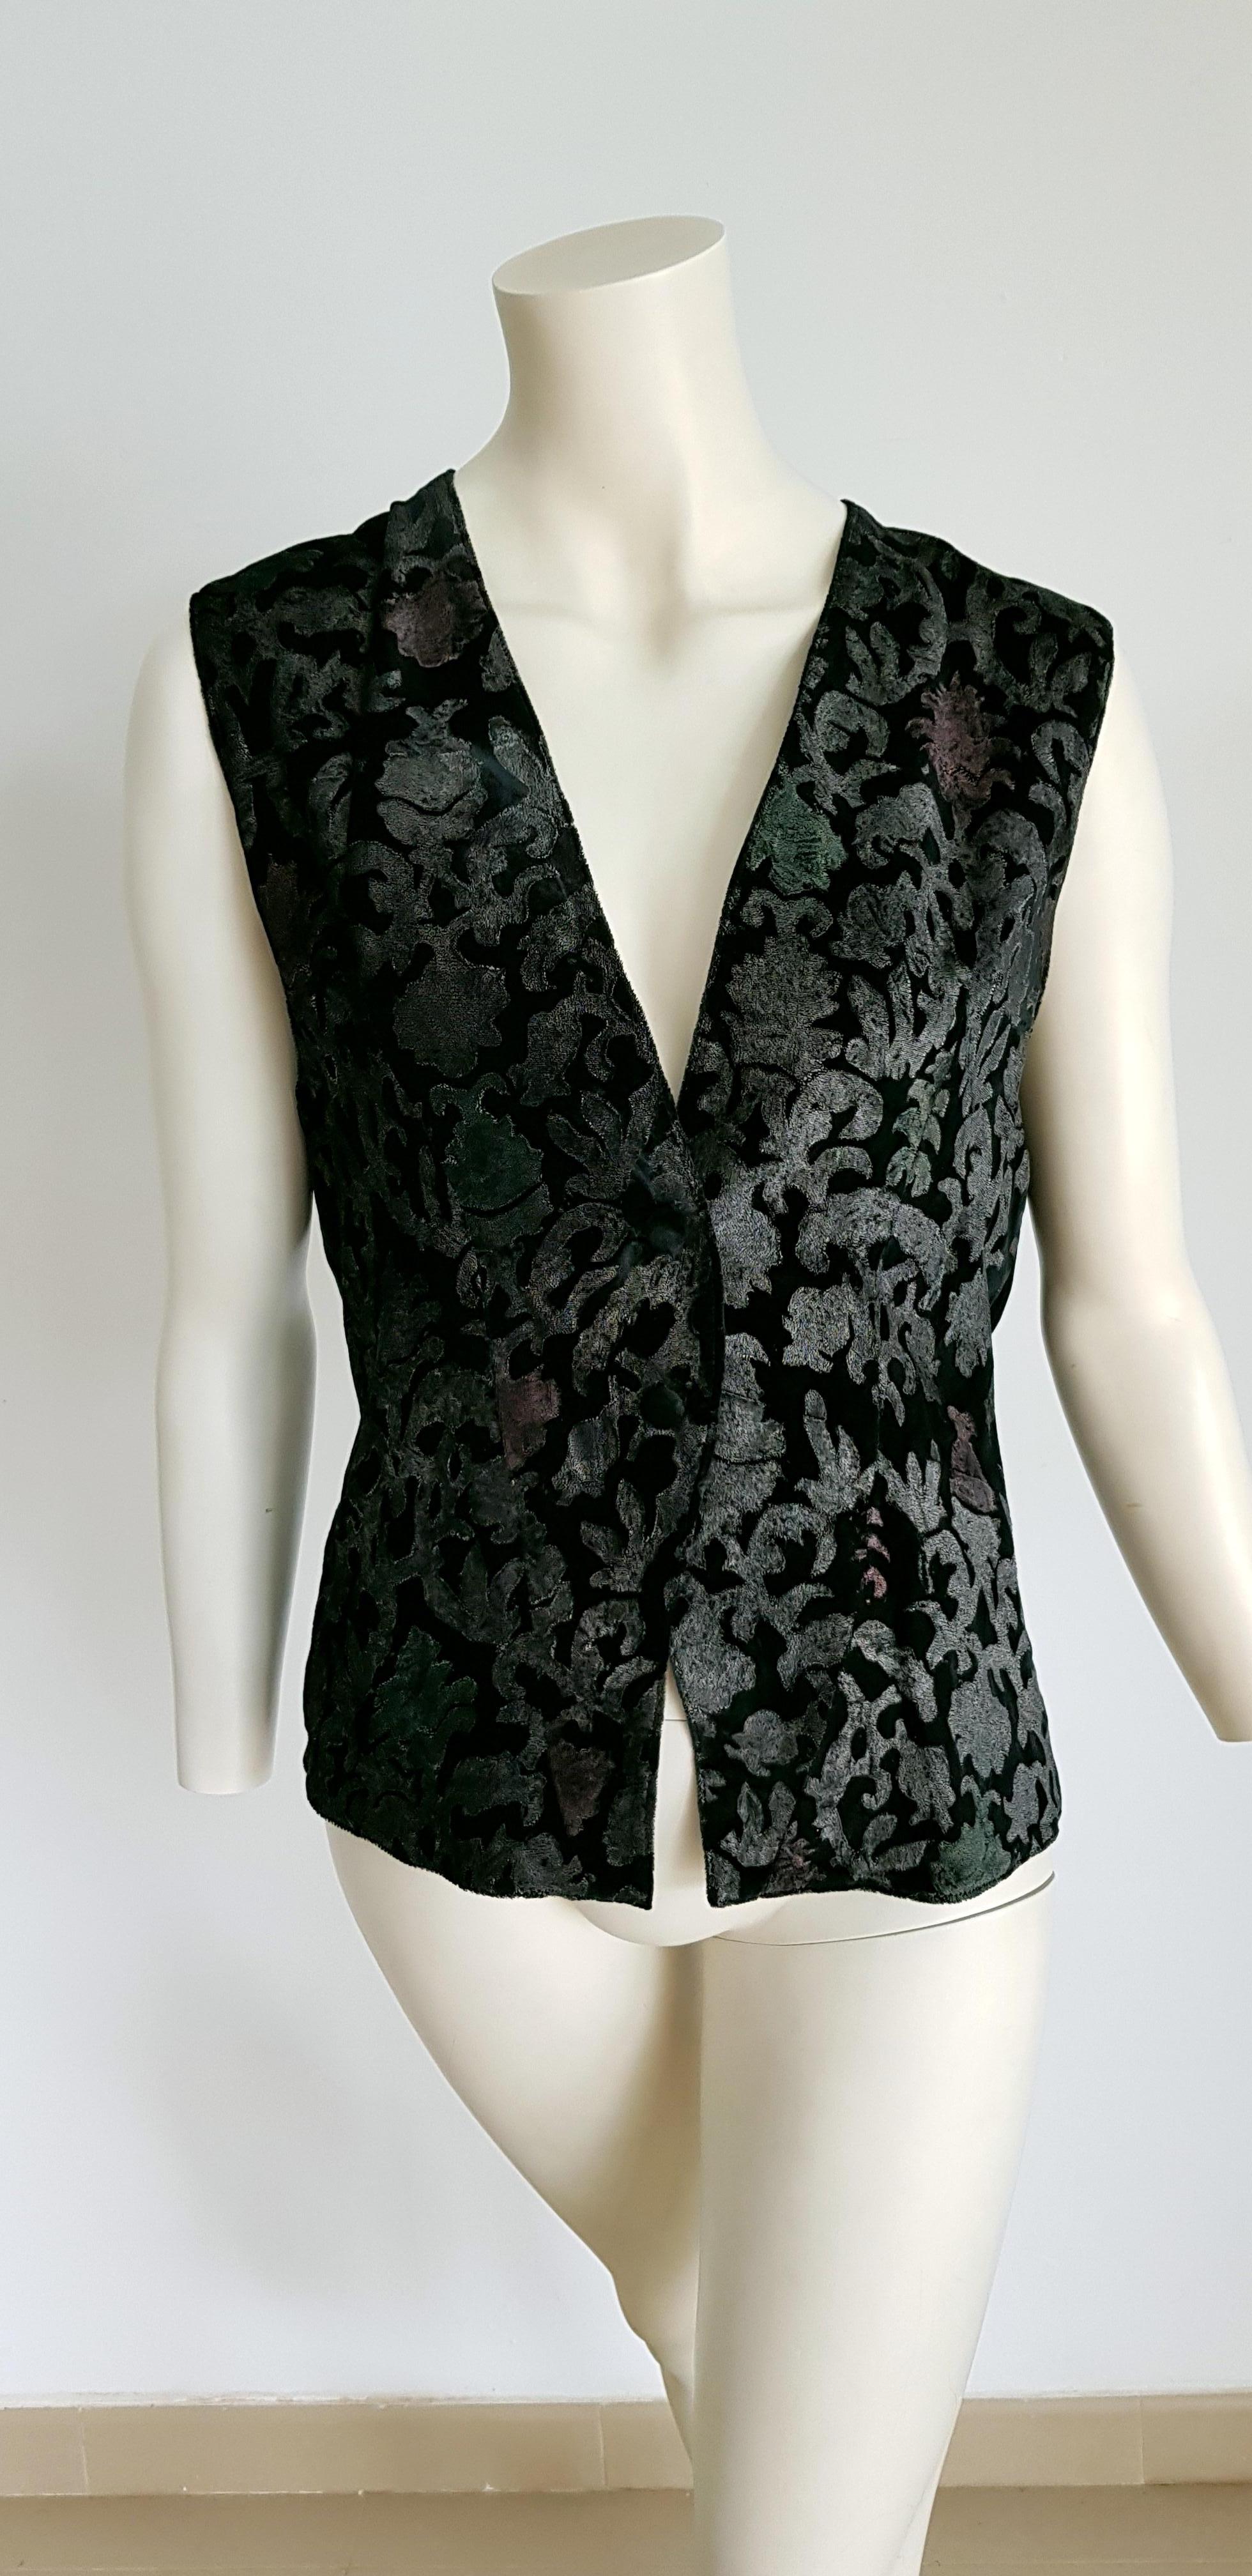 FORTUNY Fabric, Hand Painted, Collectible, Flowers Theme Single piece unique design, Silk Lined, Silk Velvet, Gilet Vest - Unworn, New.

SIZE: equivalent to about Small / Medium, please review approx measurements as follows in cm: lenght 62 (24.18